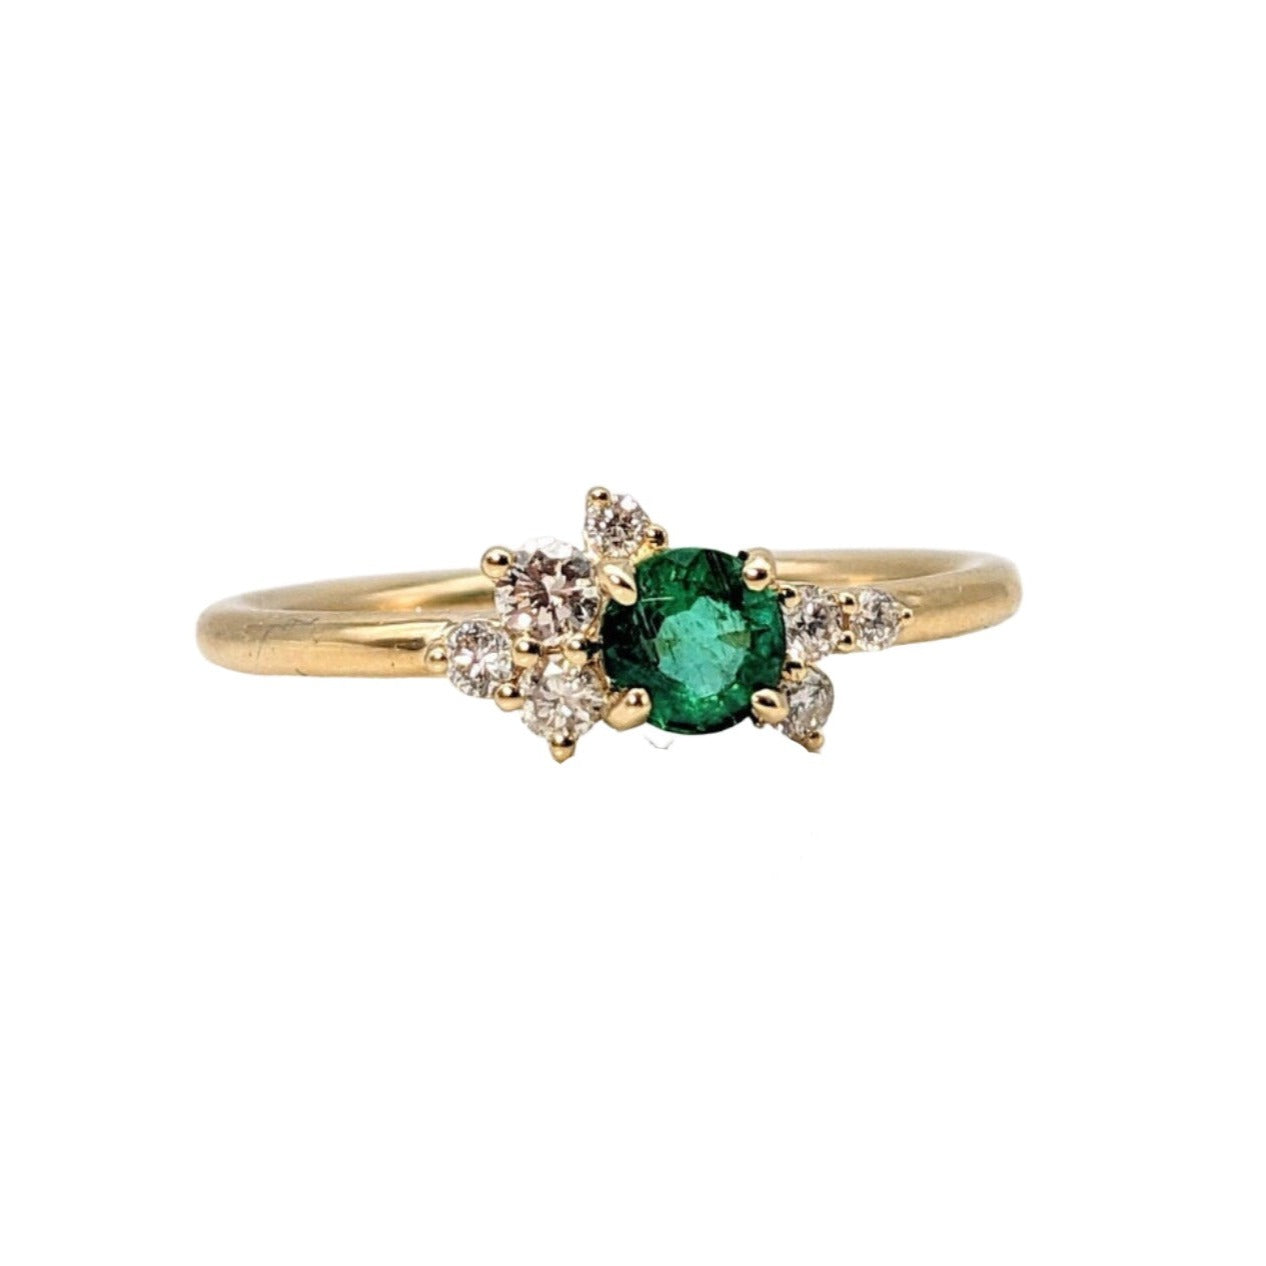 Asymmetrical Emerald Ring in 14k Solid Yellow Gold w Diamond Accents | Round 4mm | Modern Chic | Natural Gemstones | Ready to Ship!